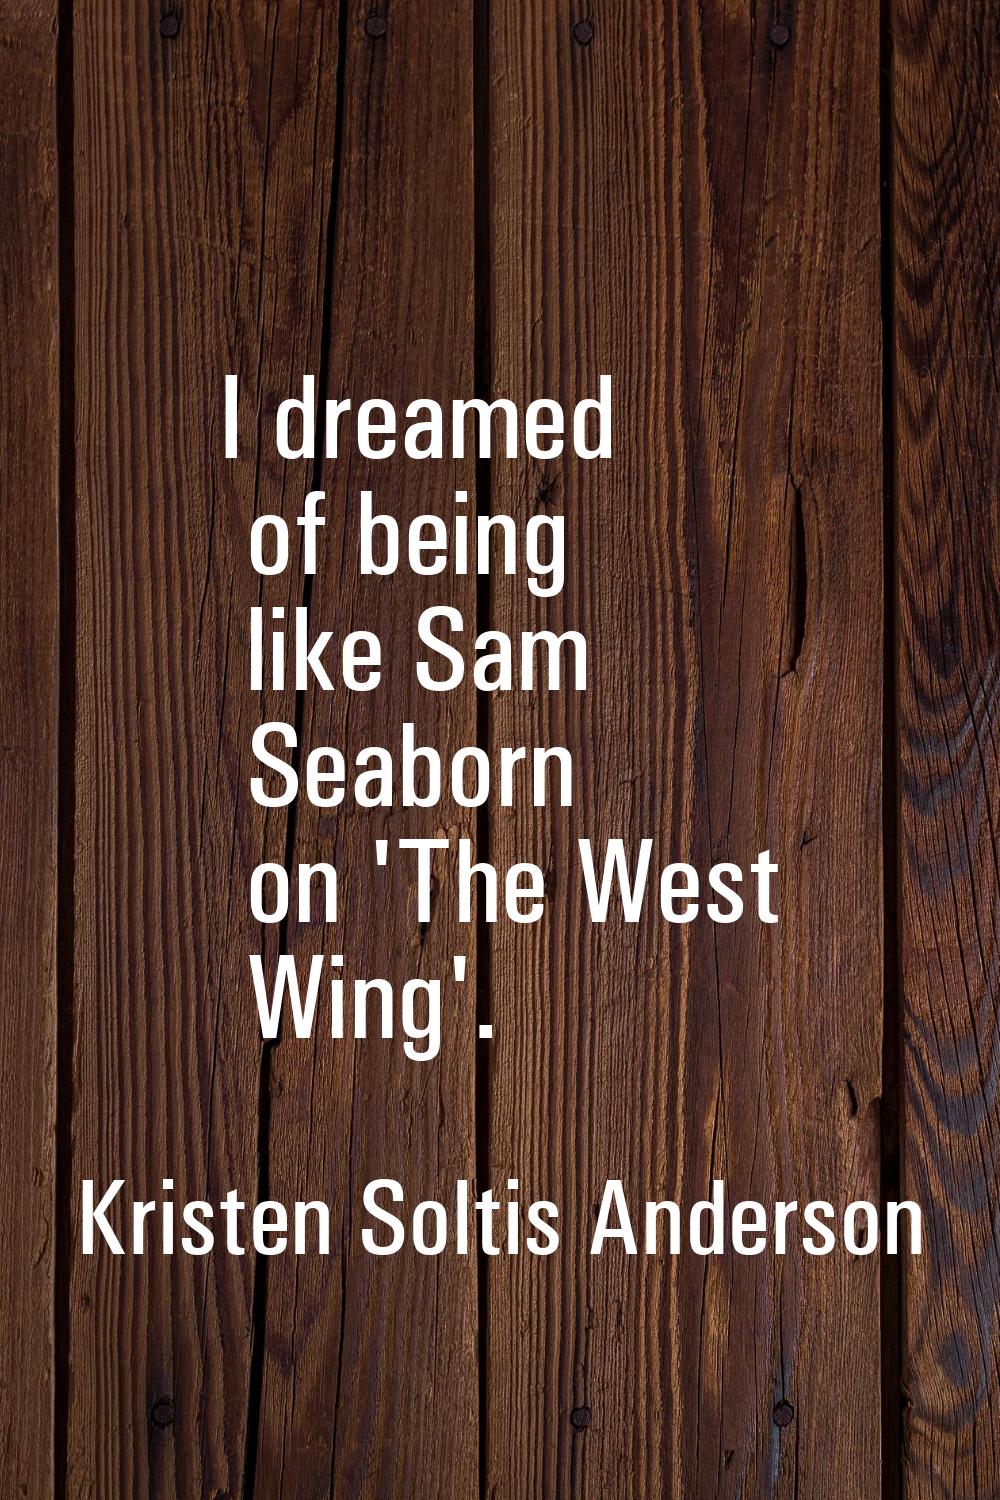 I dreamed of being like Sam Seaborn on 'The West Wing'.